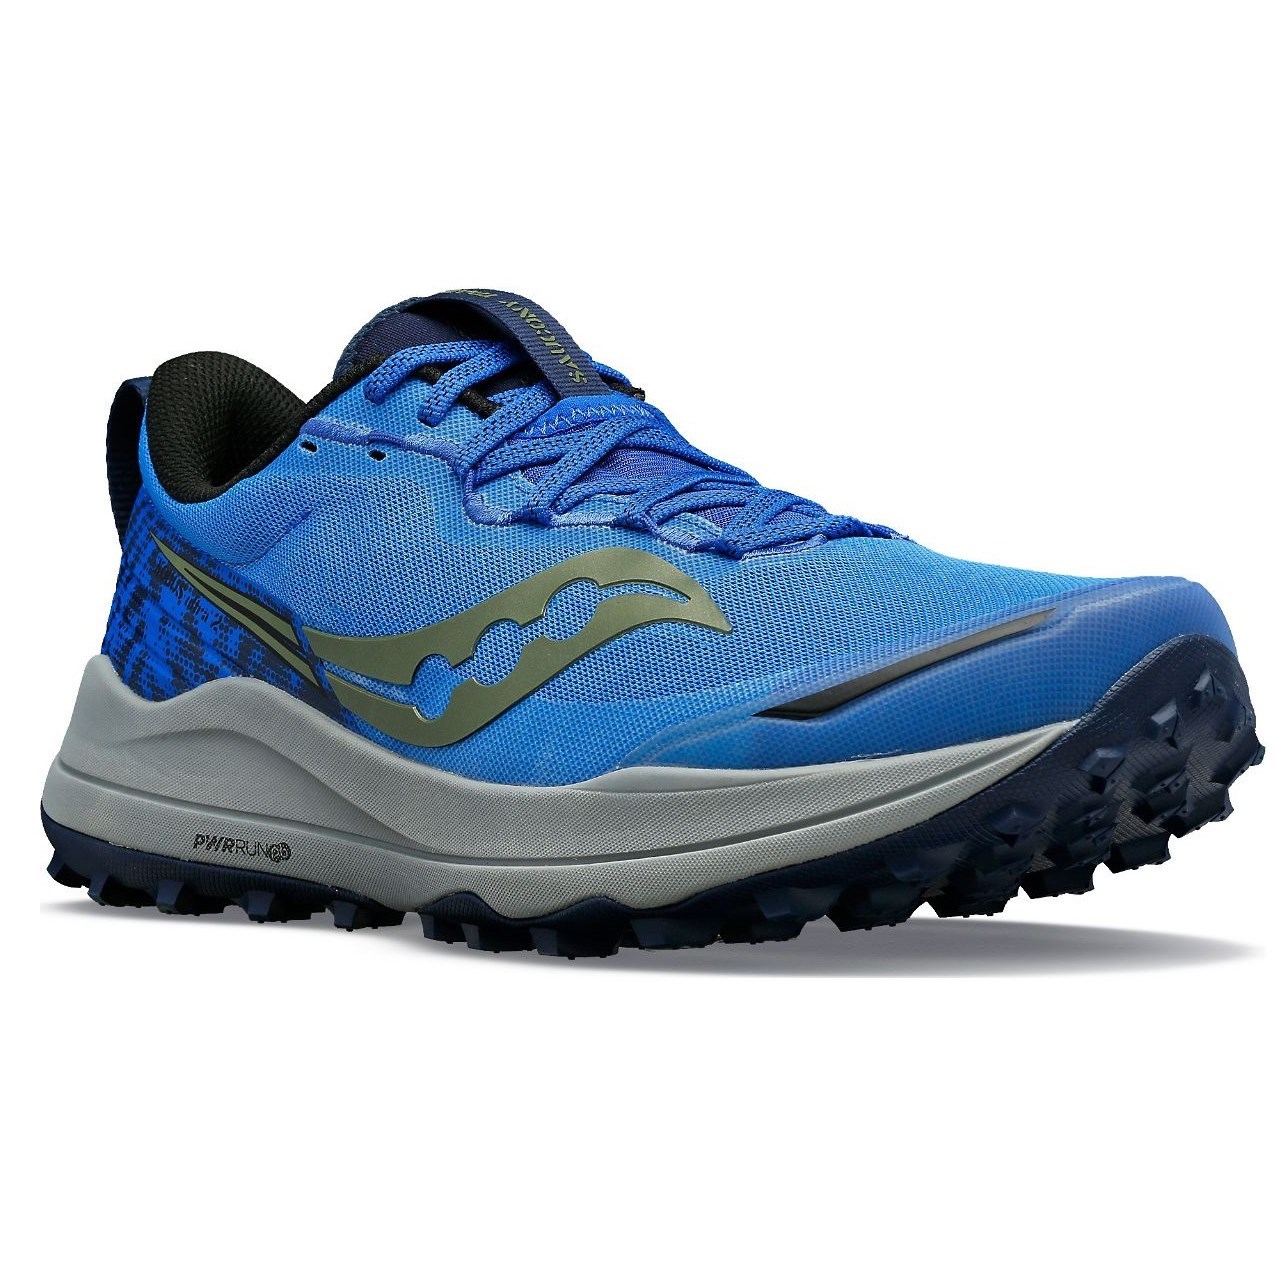 Saucony Xodus Ultra 2 - Mens Trail Running Shoes - Superblue/Night ...